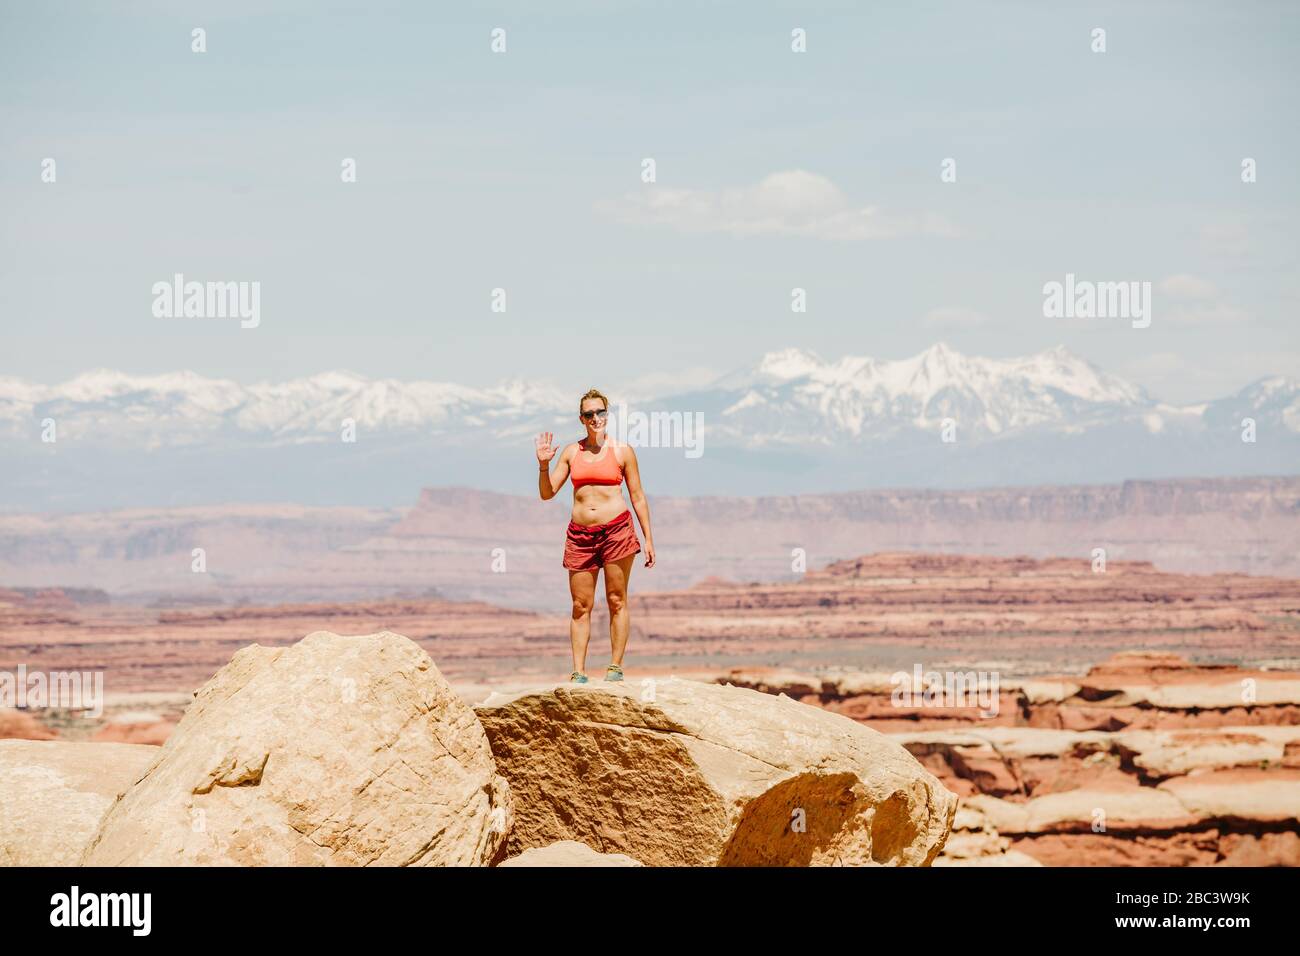 female hiker in sports bra and shorts waves from a desert